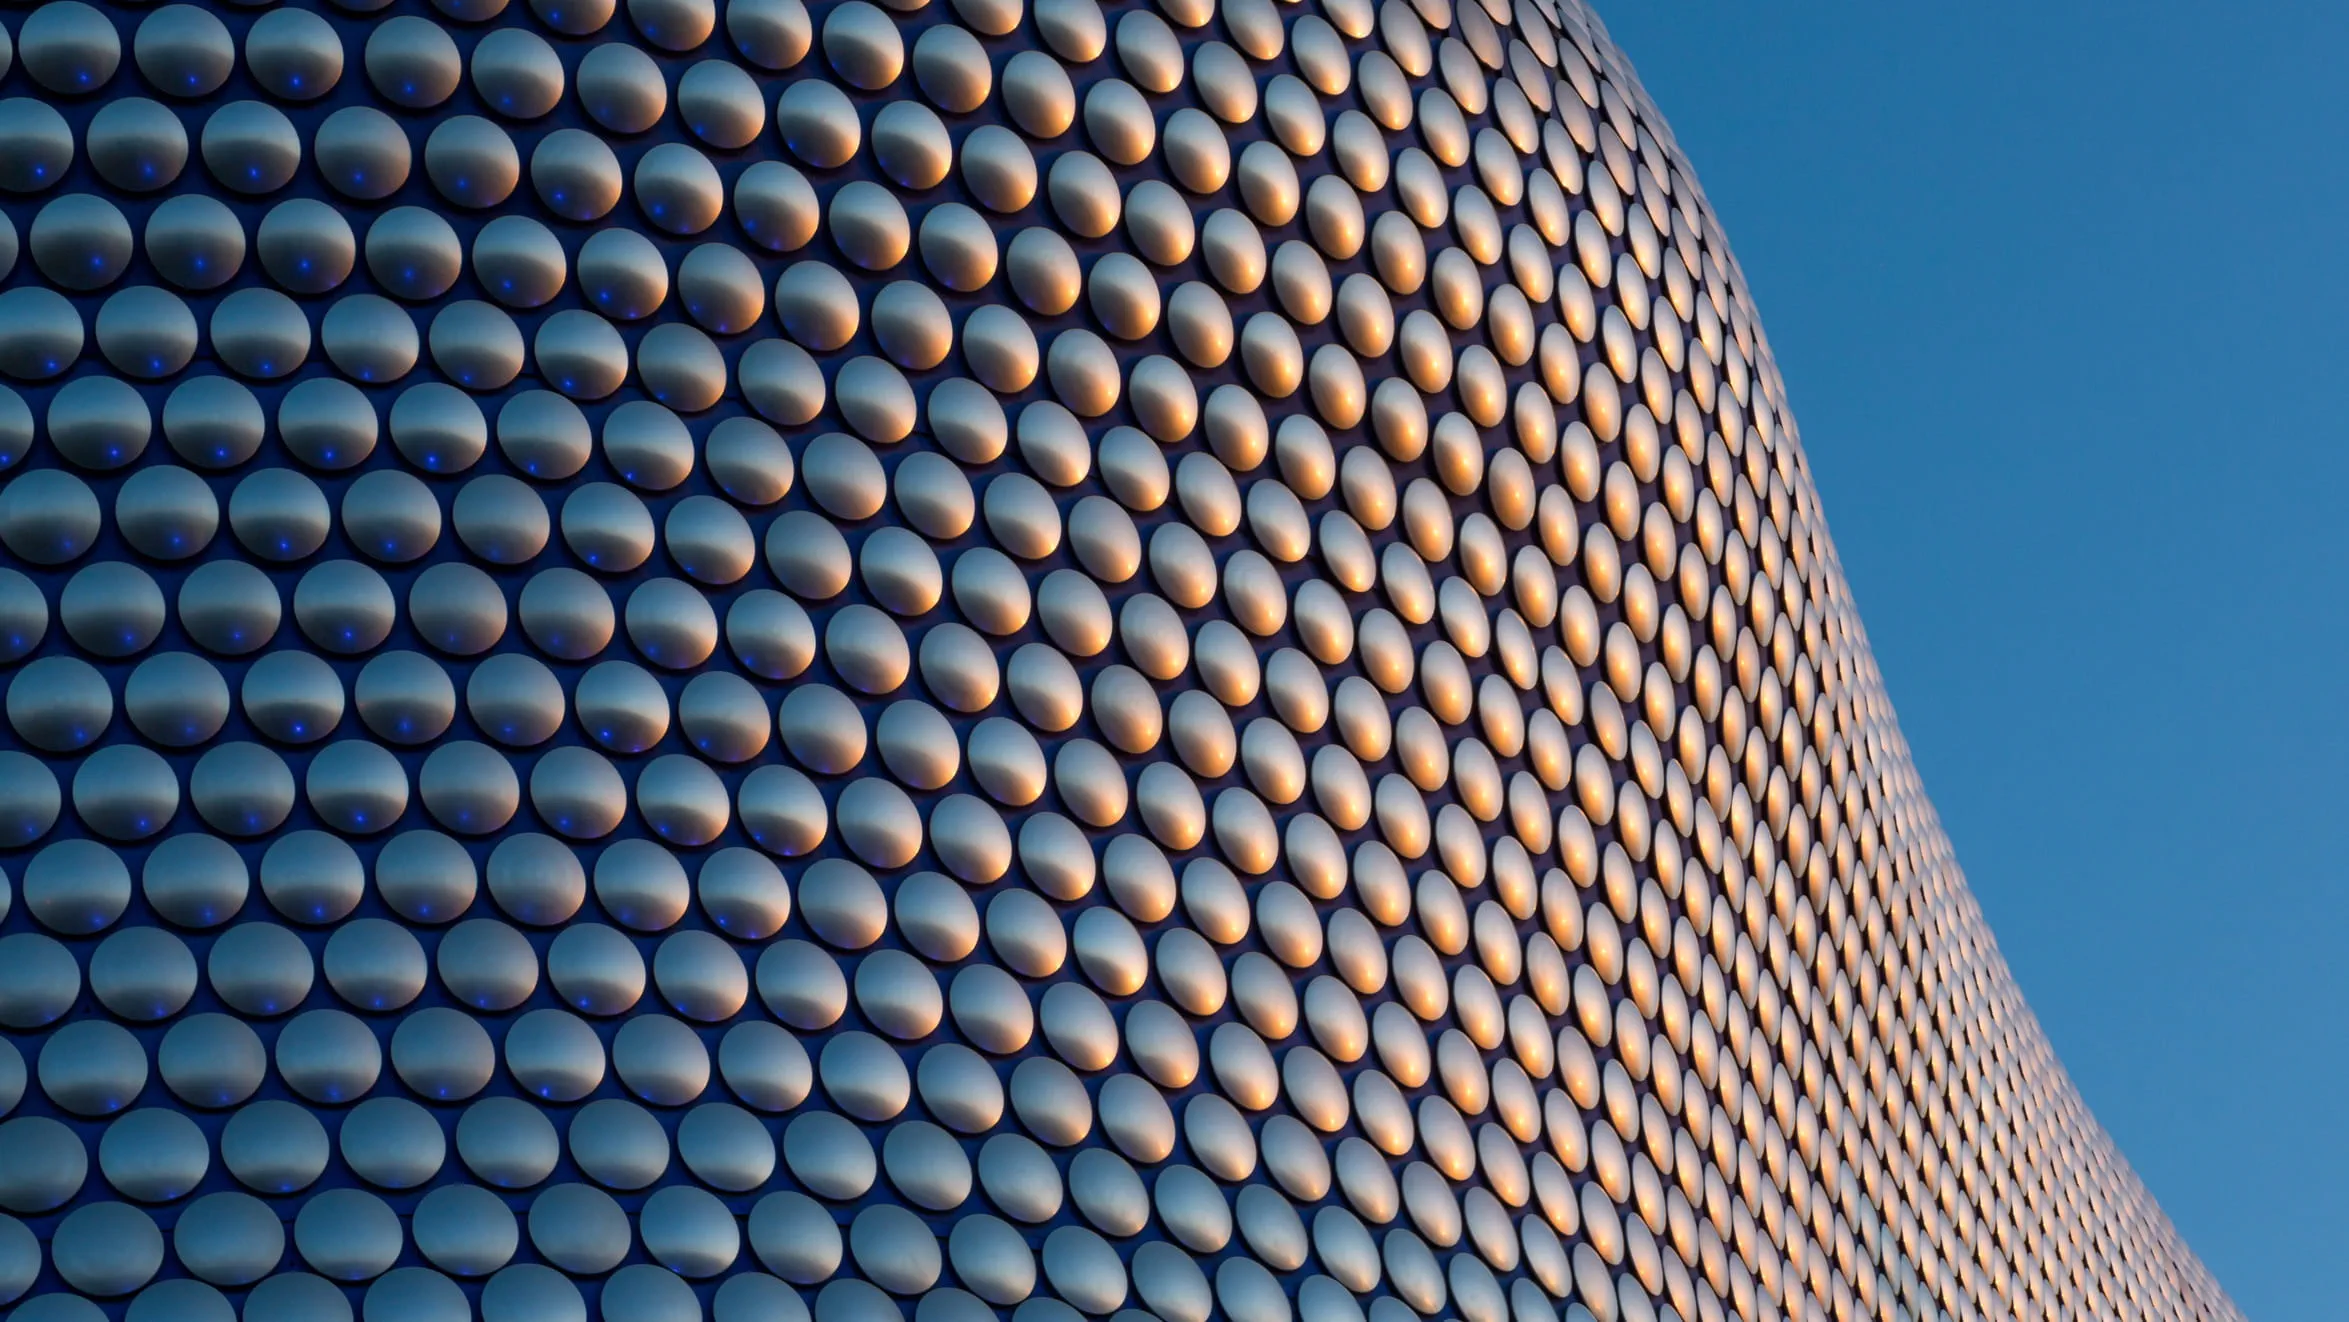 The futuristic new, 26,0000m2 Selfridges department store as part of the redevelopment of the Bull Ring shopping centre in the heart of Birmingham. Photo credit: Paul Carstairs